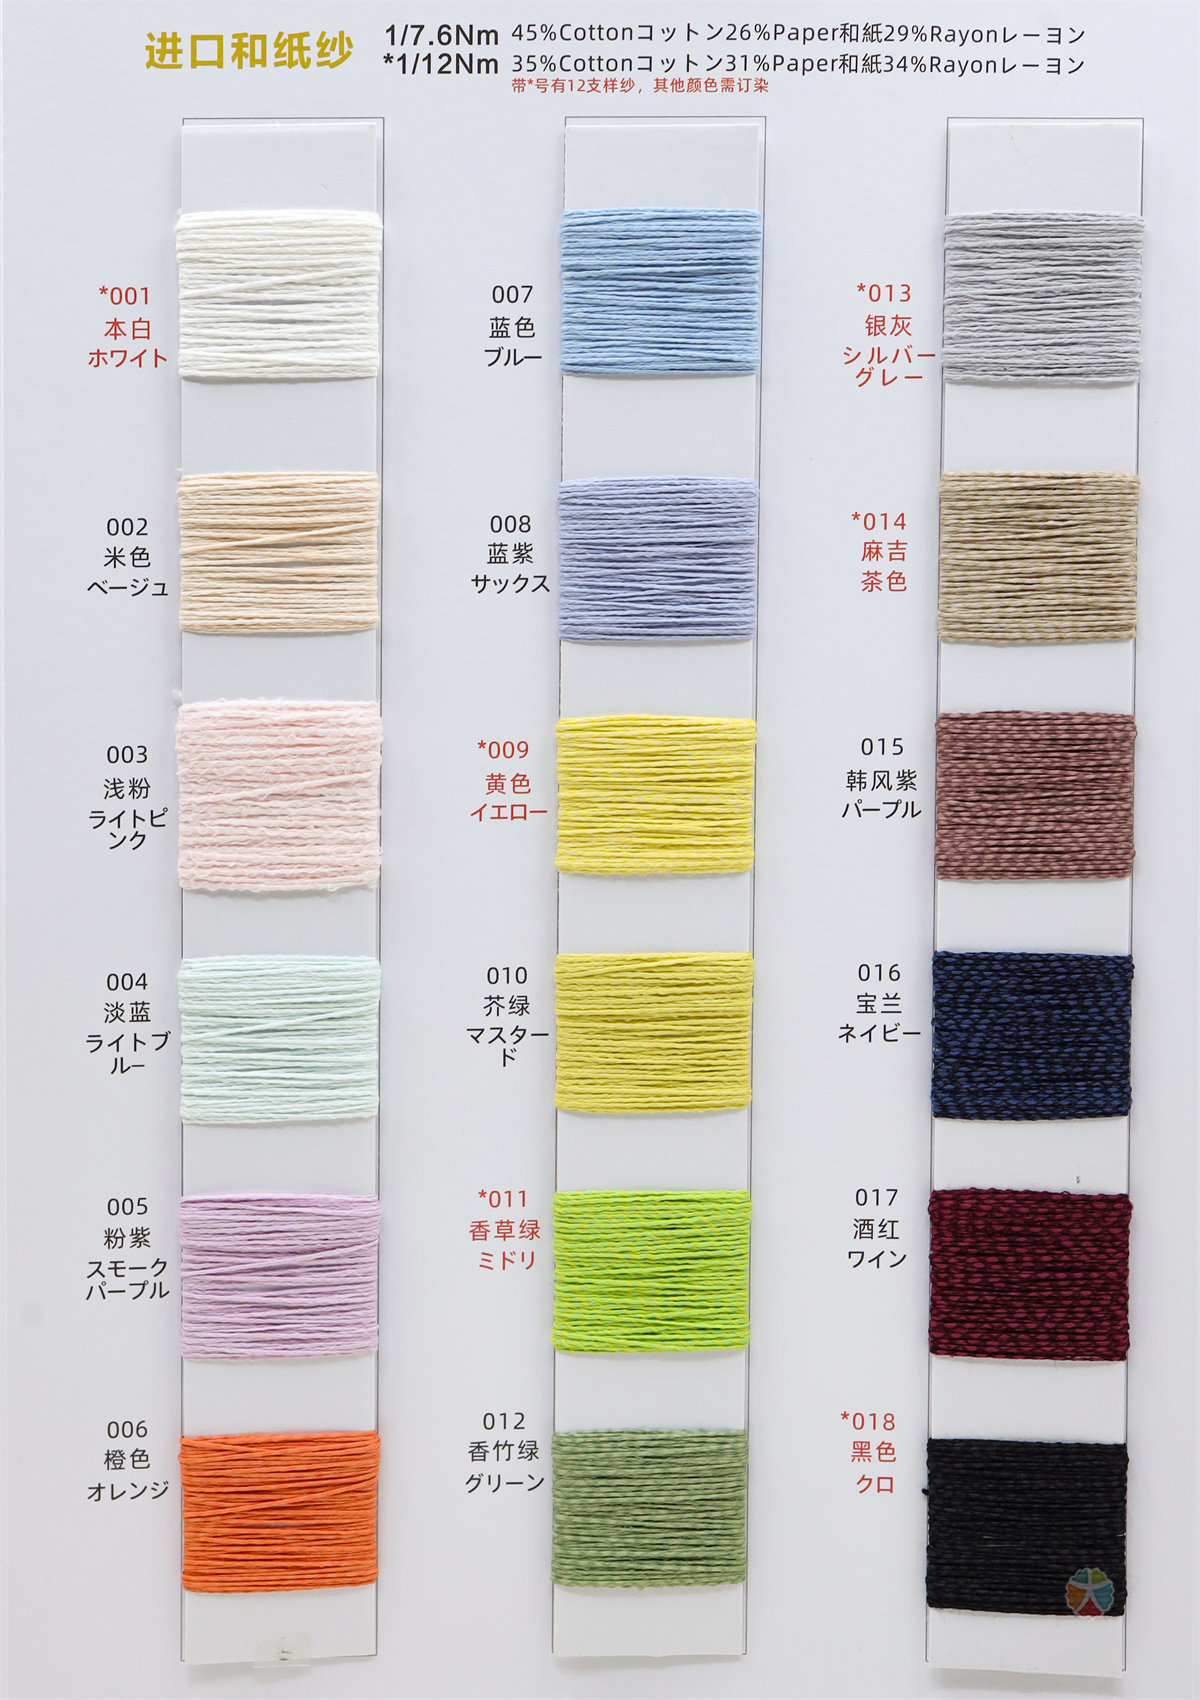 1/7.6NM 45cotton 26imported and 29paper 29rayon